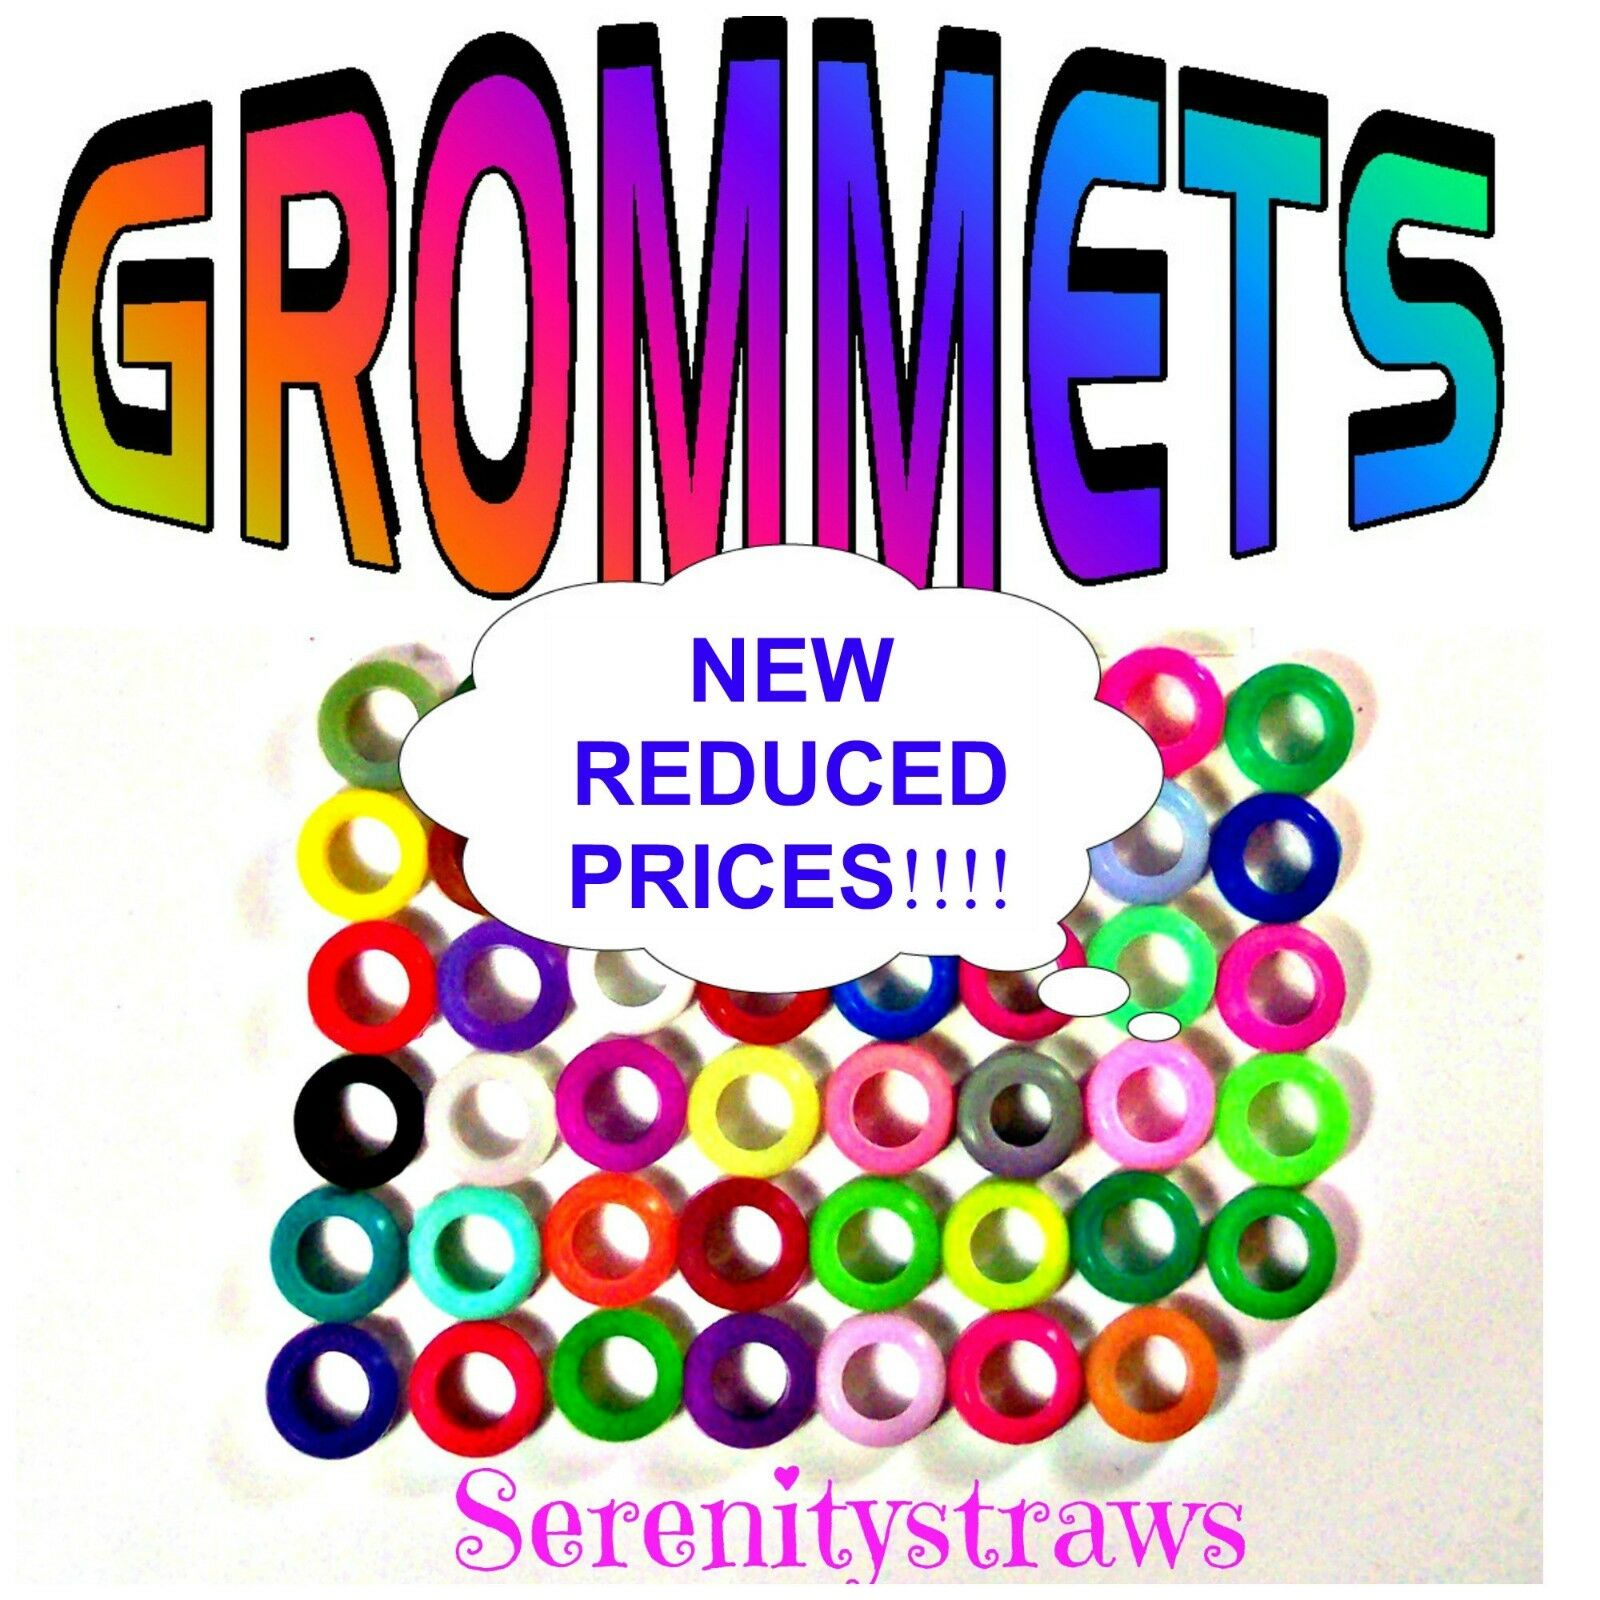 Silicone Grommets, 5/16", 3/8" Or 1/2" (i.d.) For Mason Jar Straw-hole Lids